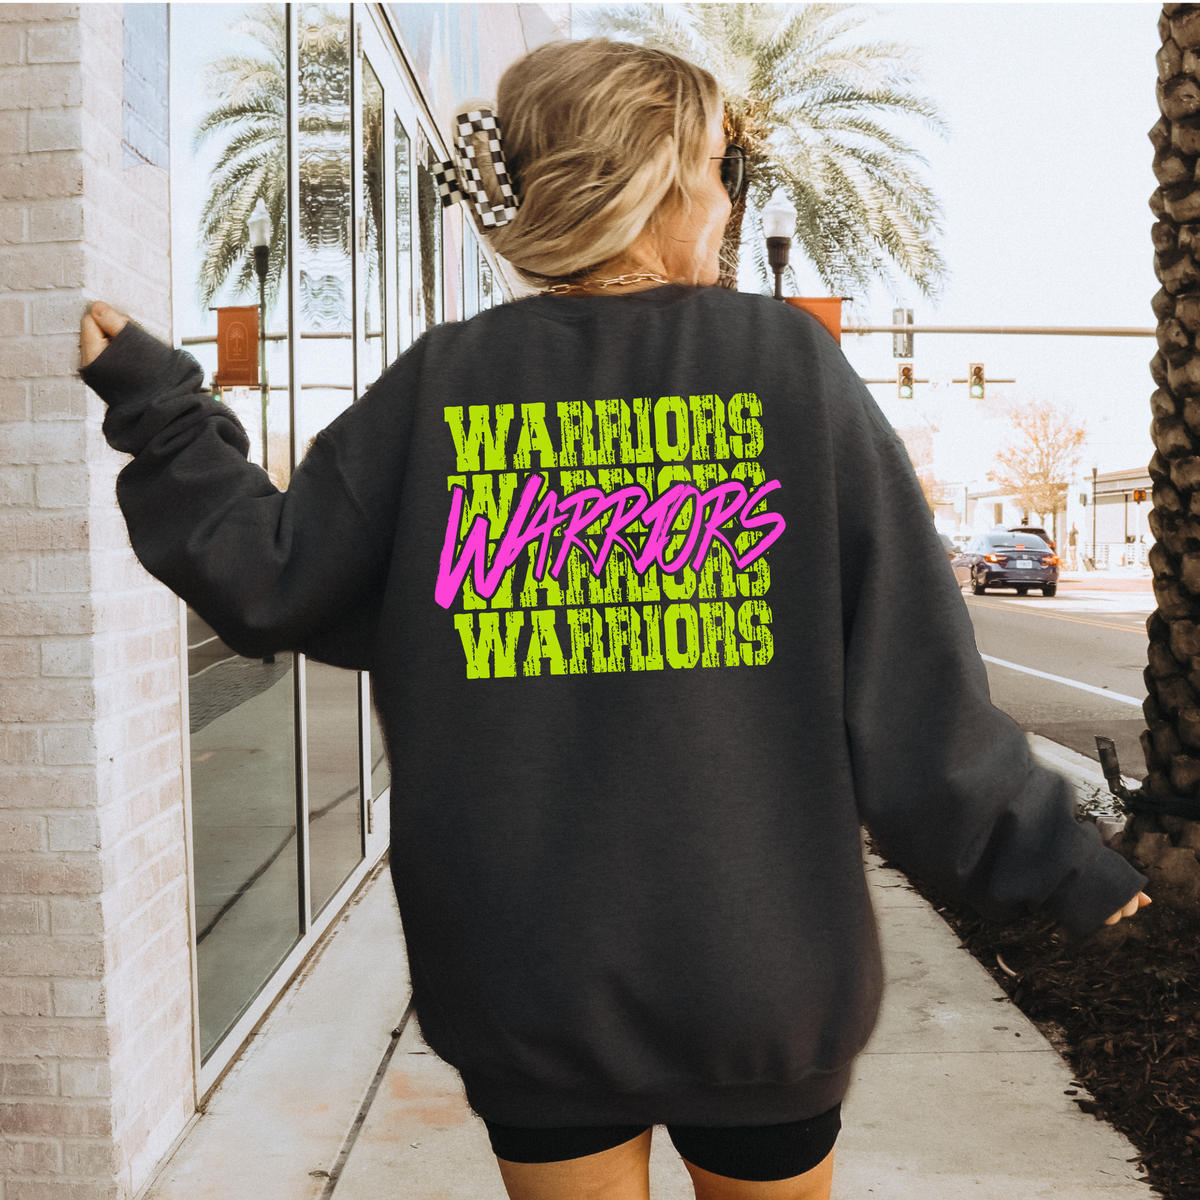 Warriors Stacked Cutout Bright Yellow & Pink Digital Design, PNG